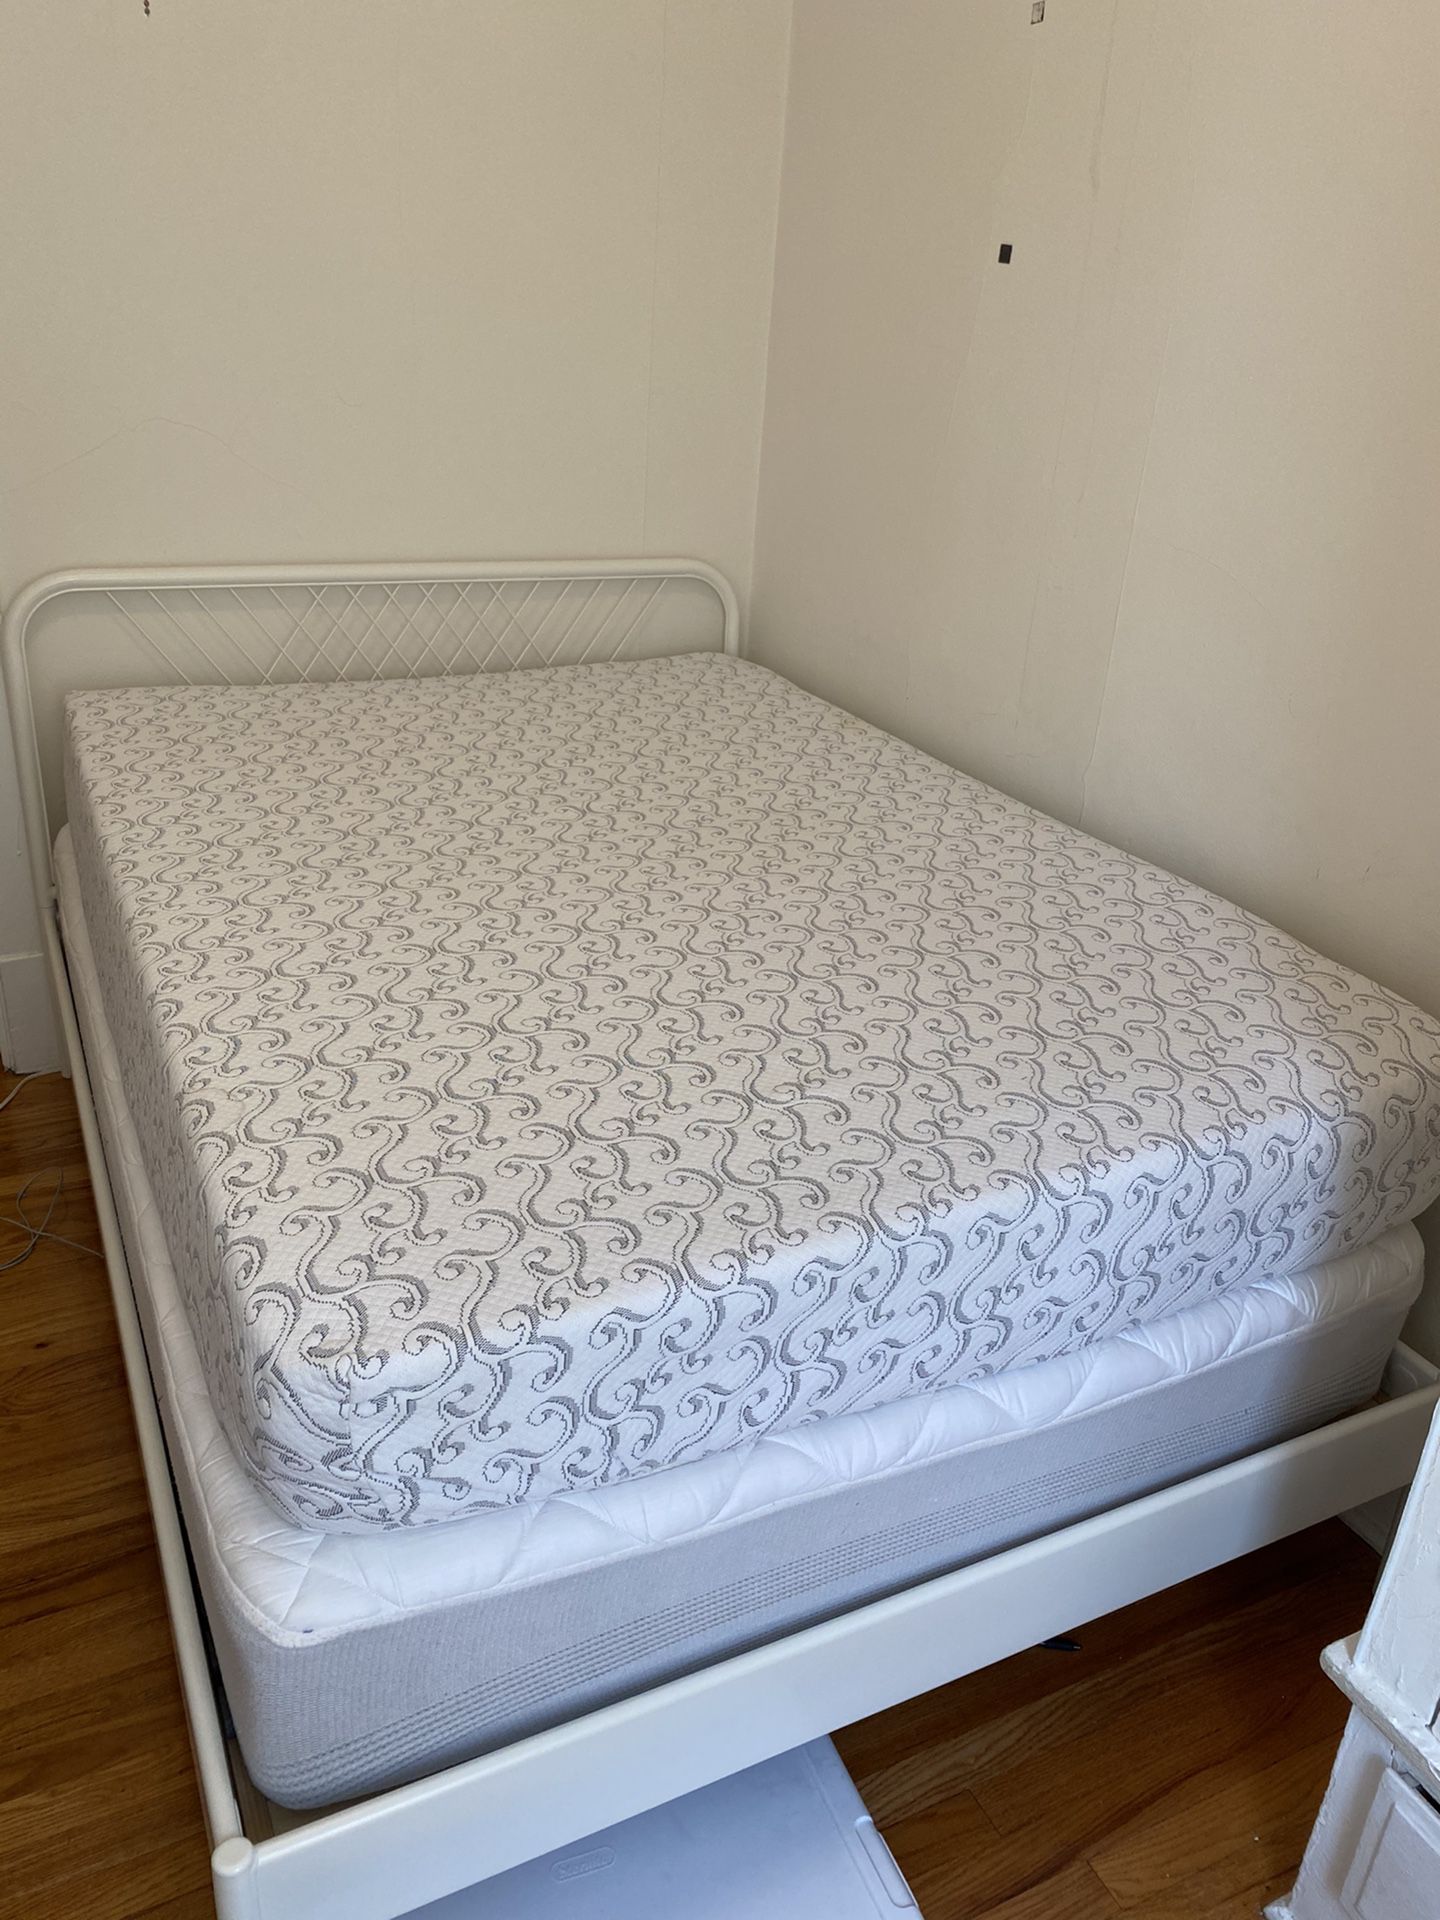 Free mattress! Very comfortable, good condition. Pickup today in Edgewater.